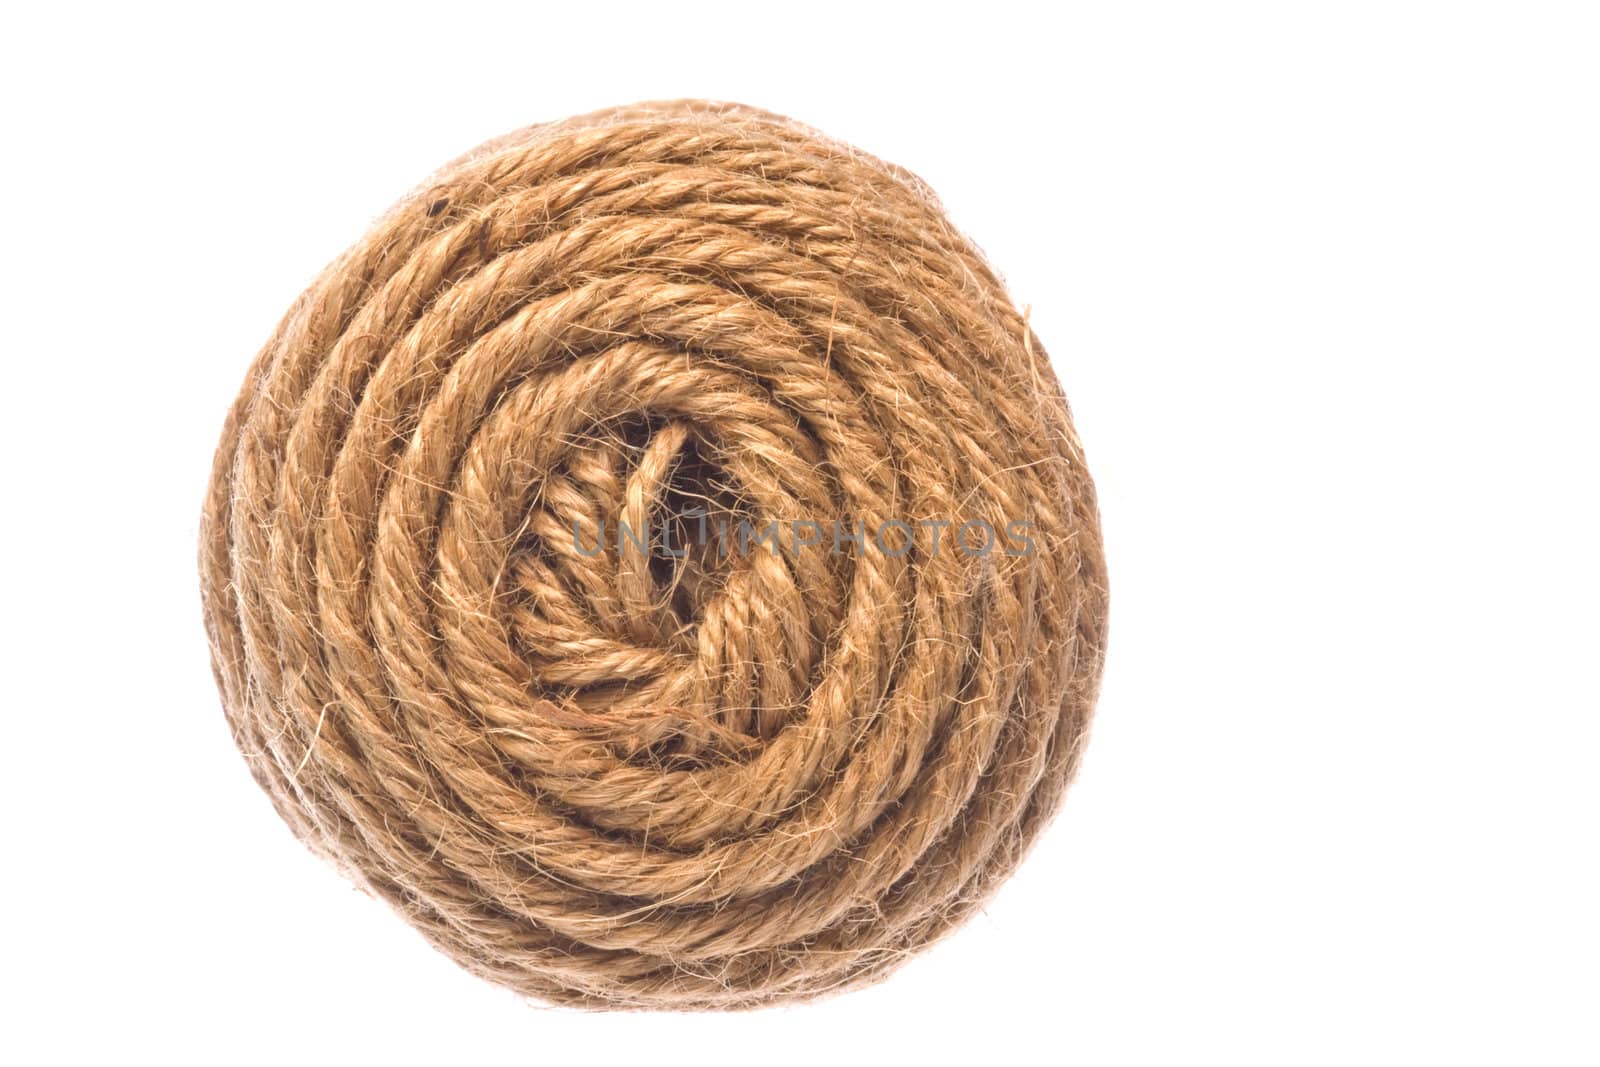 Isolated image of rope against a completely white background.